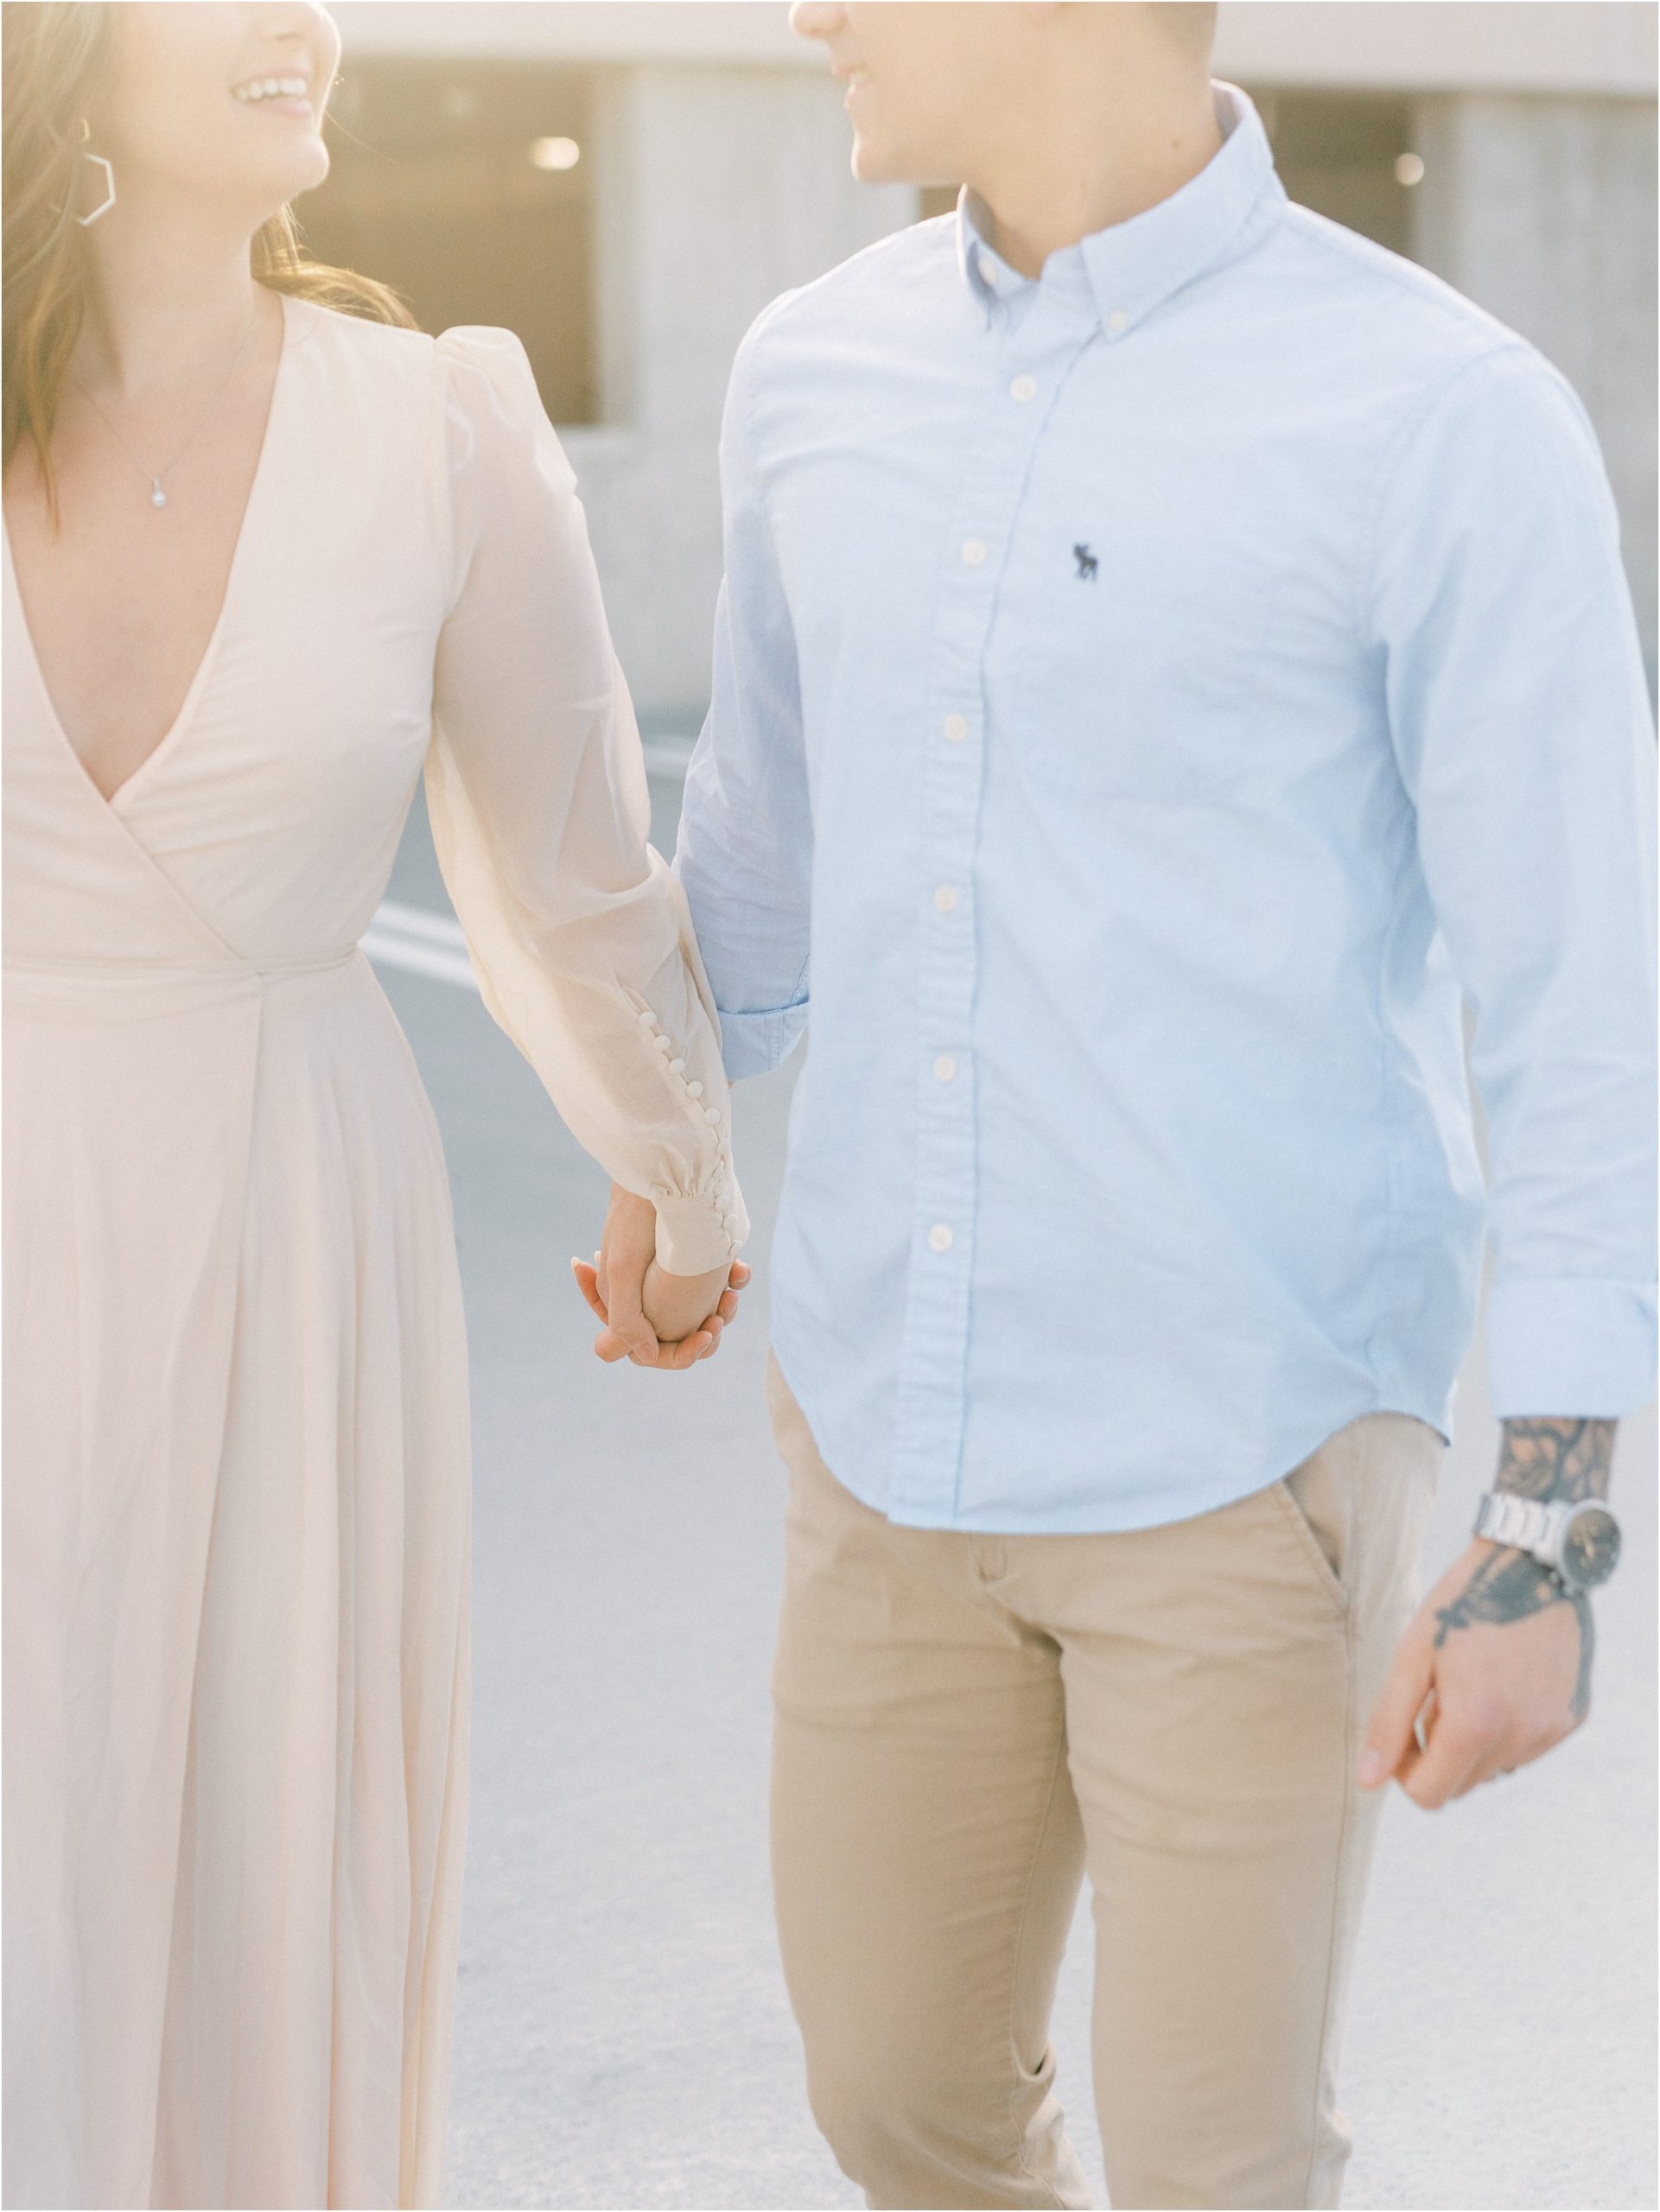 VMFA Engagement Session